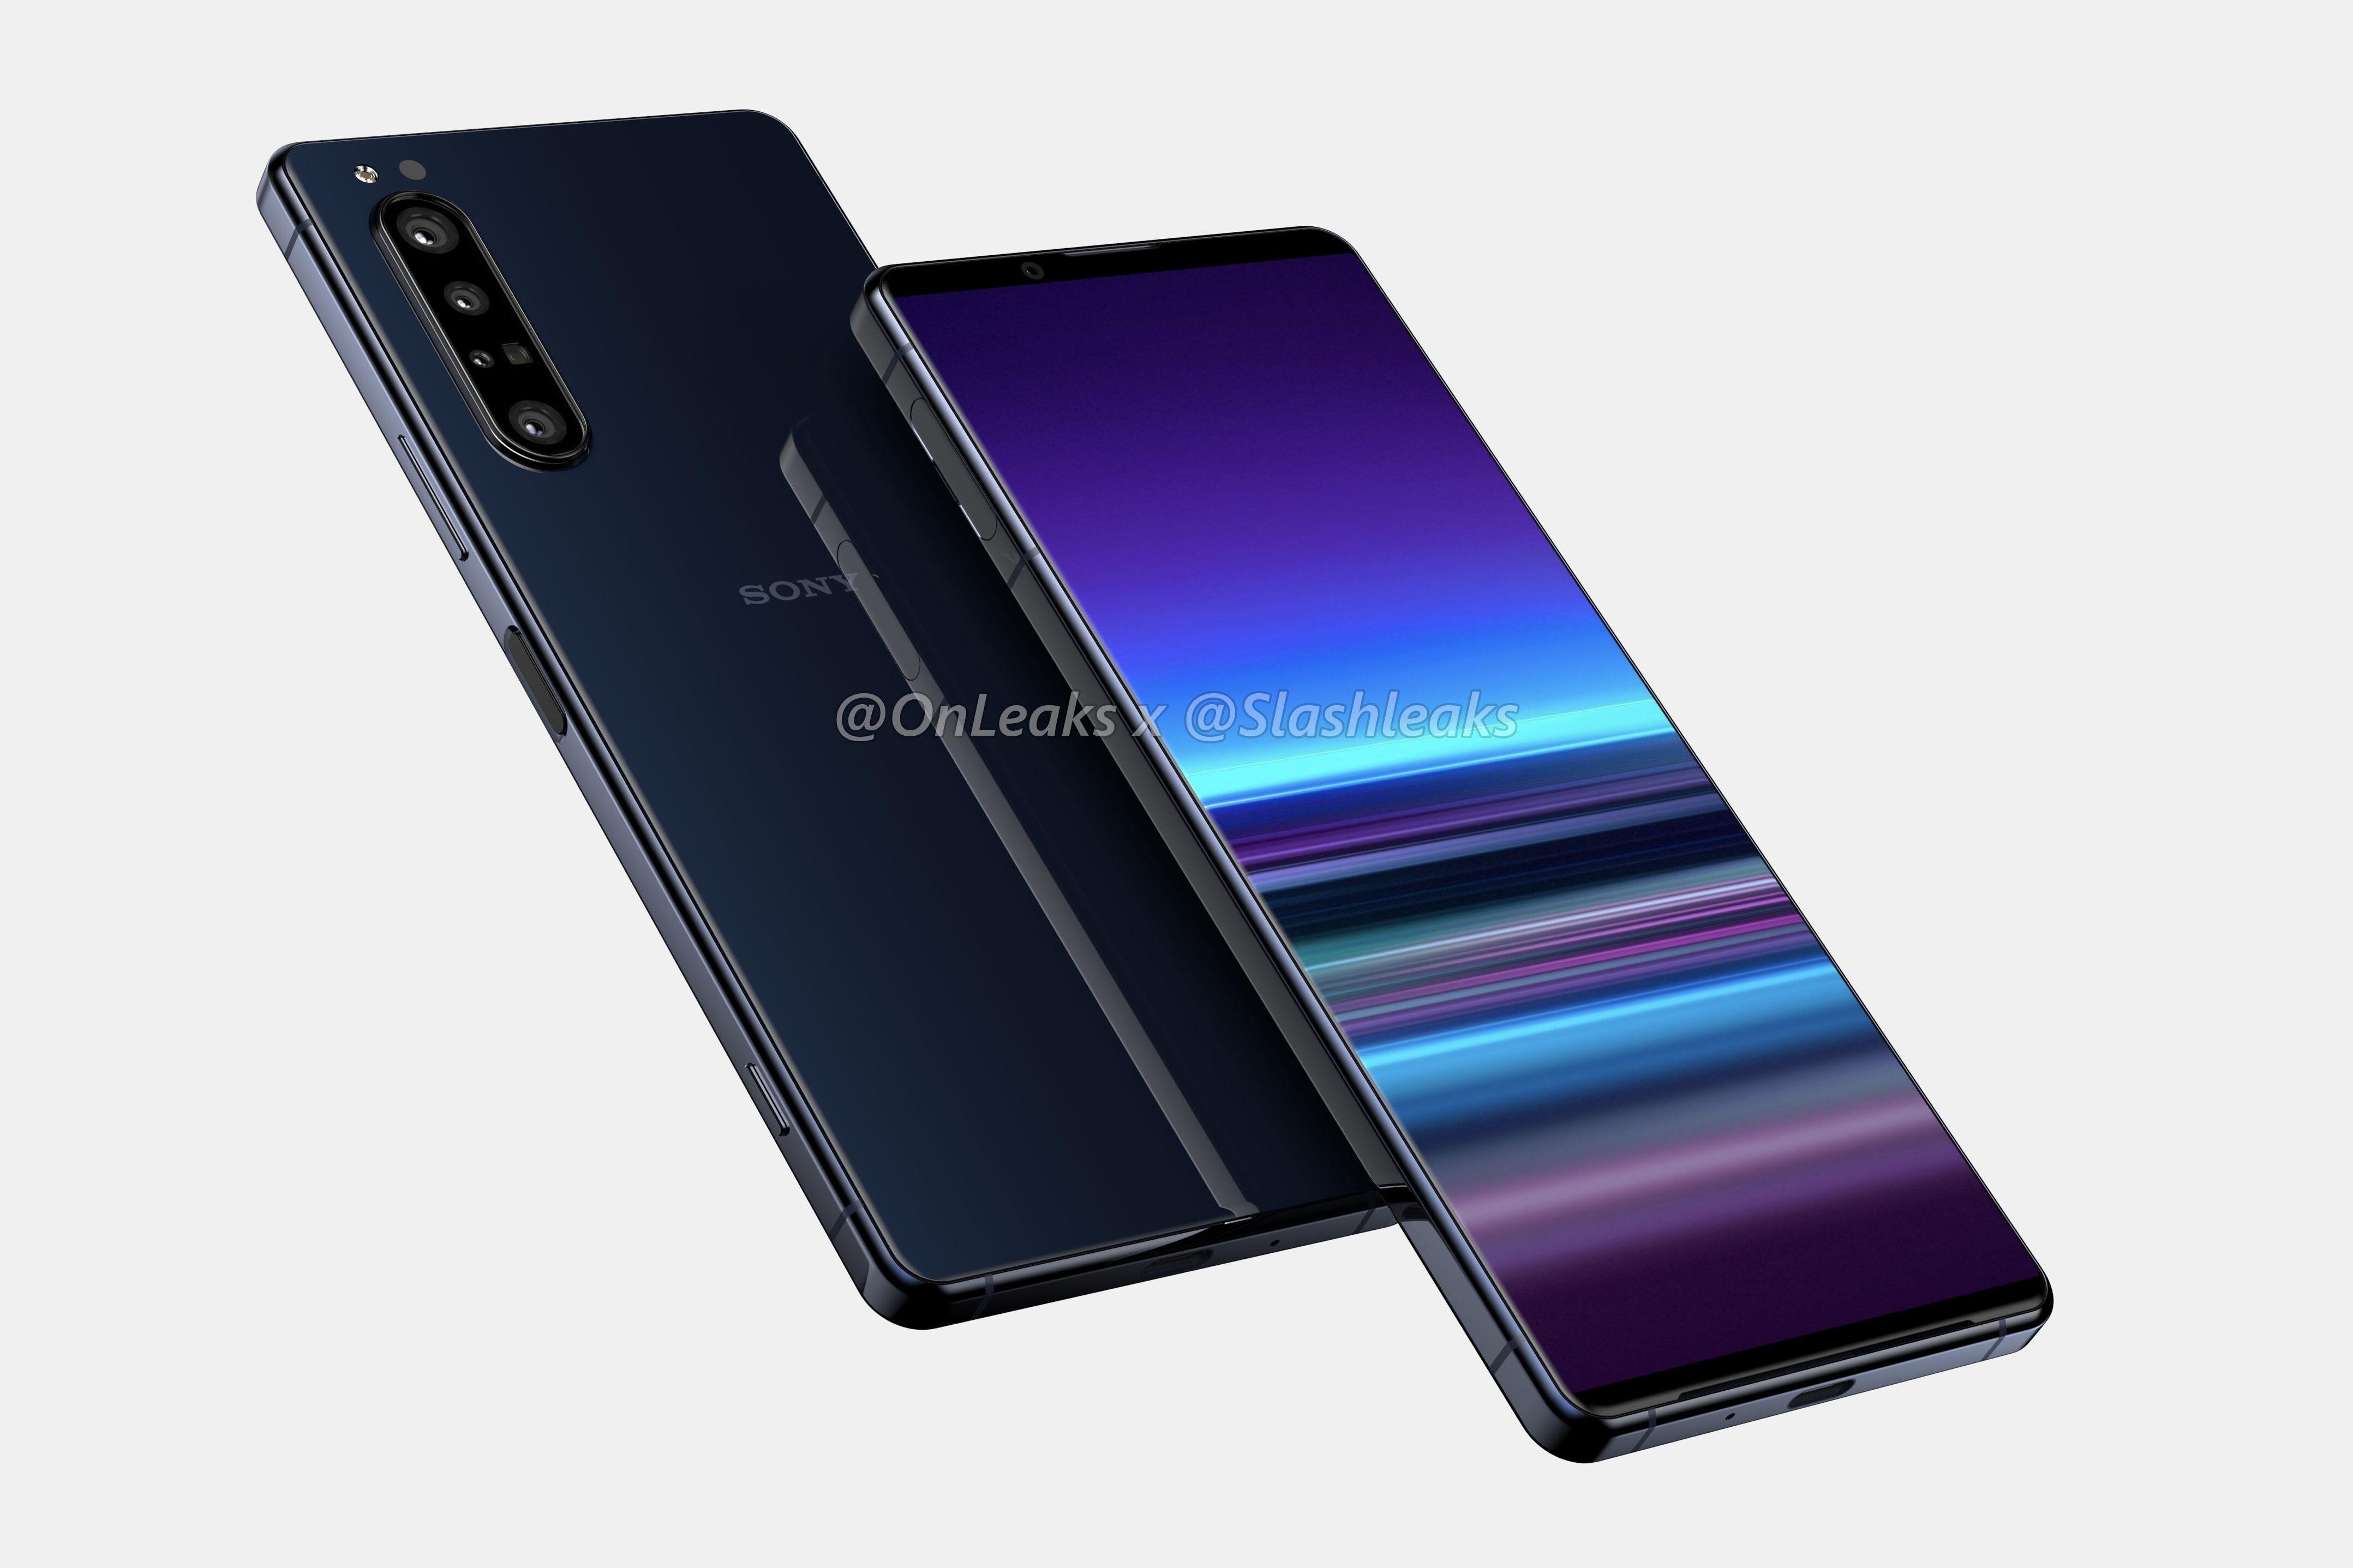 Sony Xperia 1.1 or Xperia 5 Plus CAD-based render - Sony's next Xperia flagship has leaked and it looks beautiful